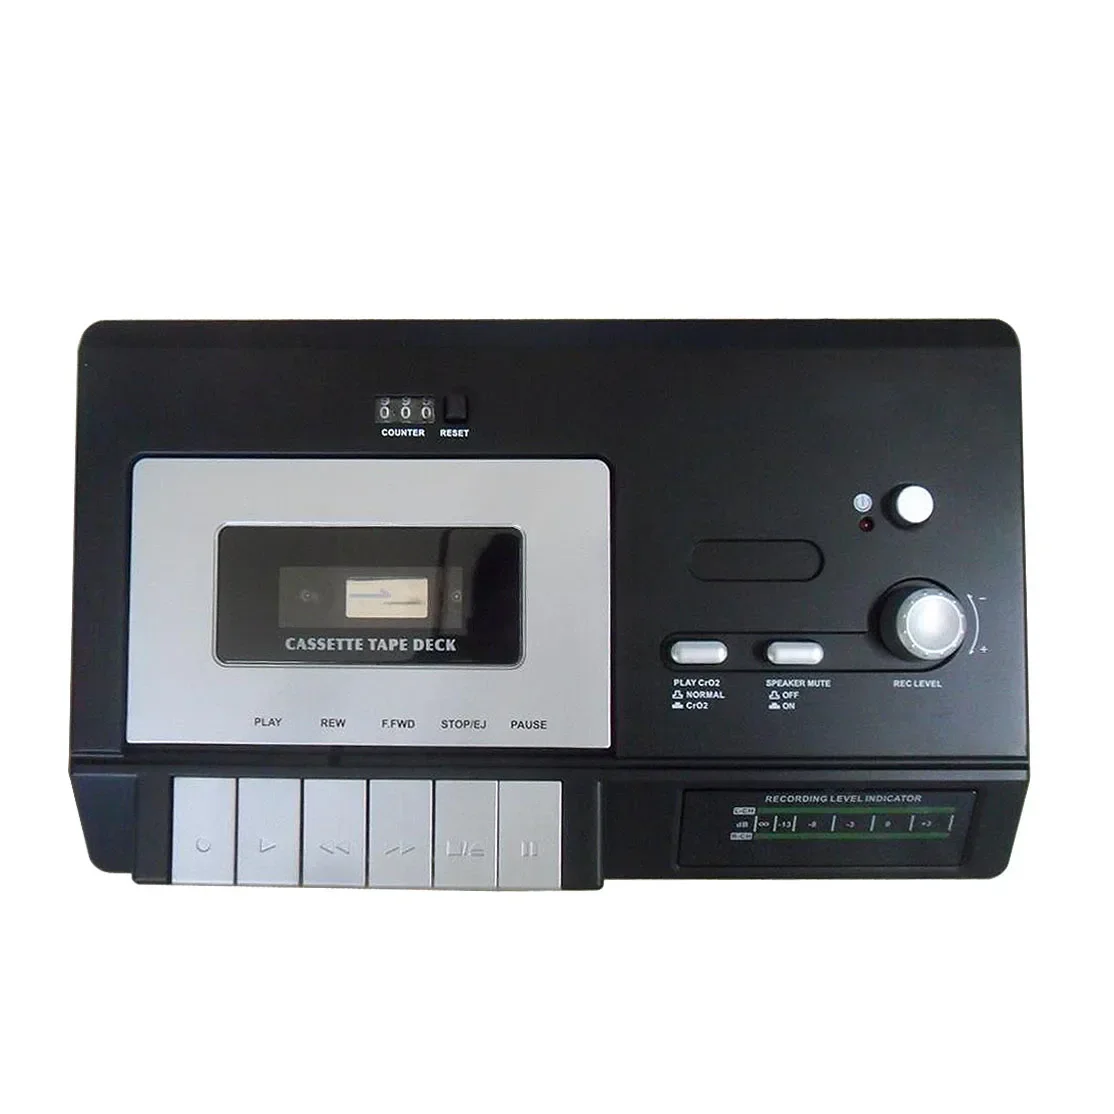 

Recording Double Tape Turntable Boombox Audio Cassette Player Recorder High Quality Portable Music System W/ USB-PC